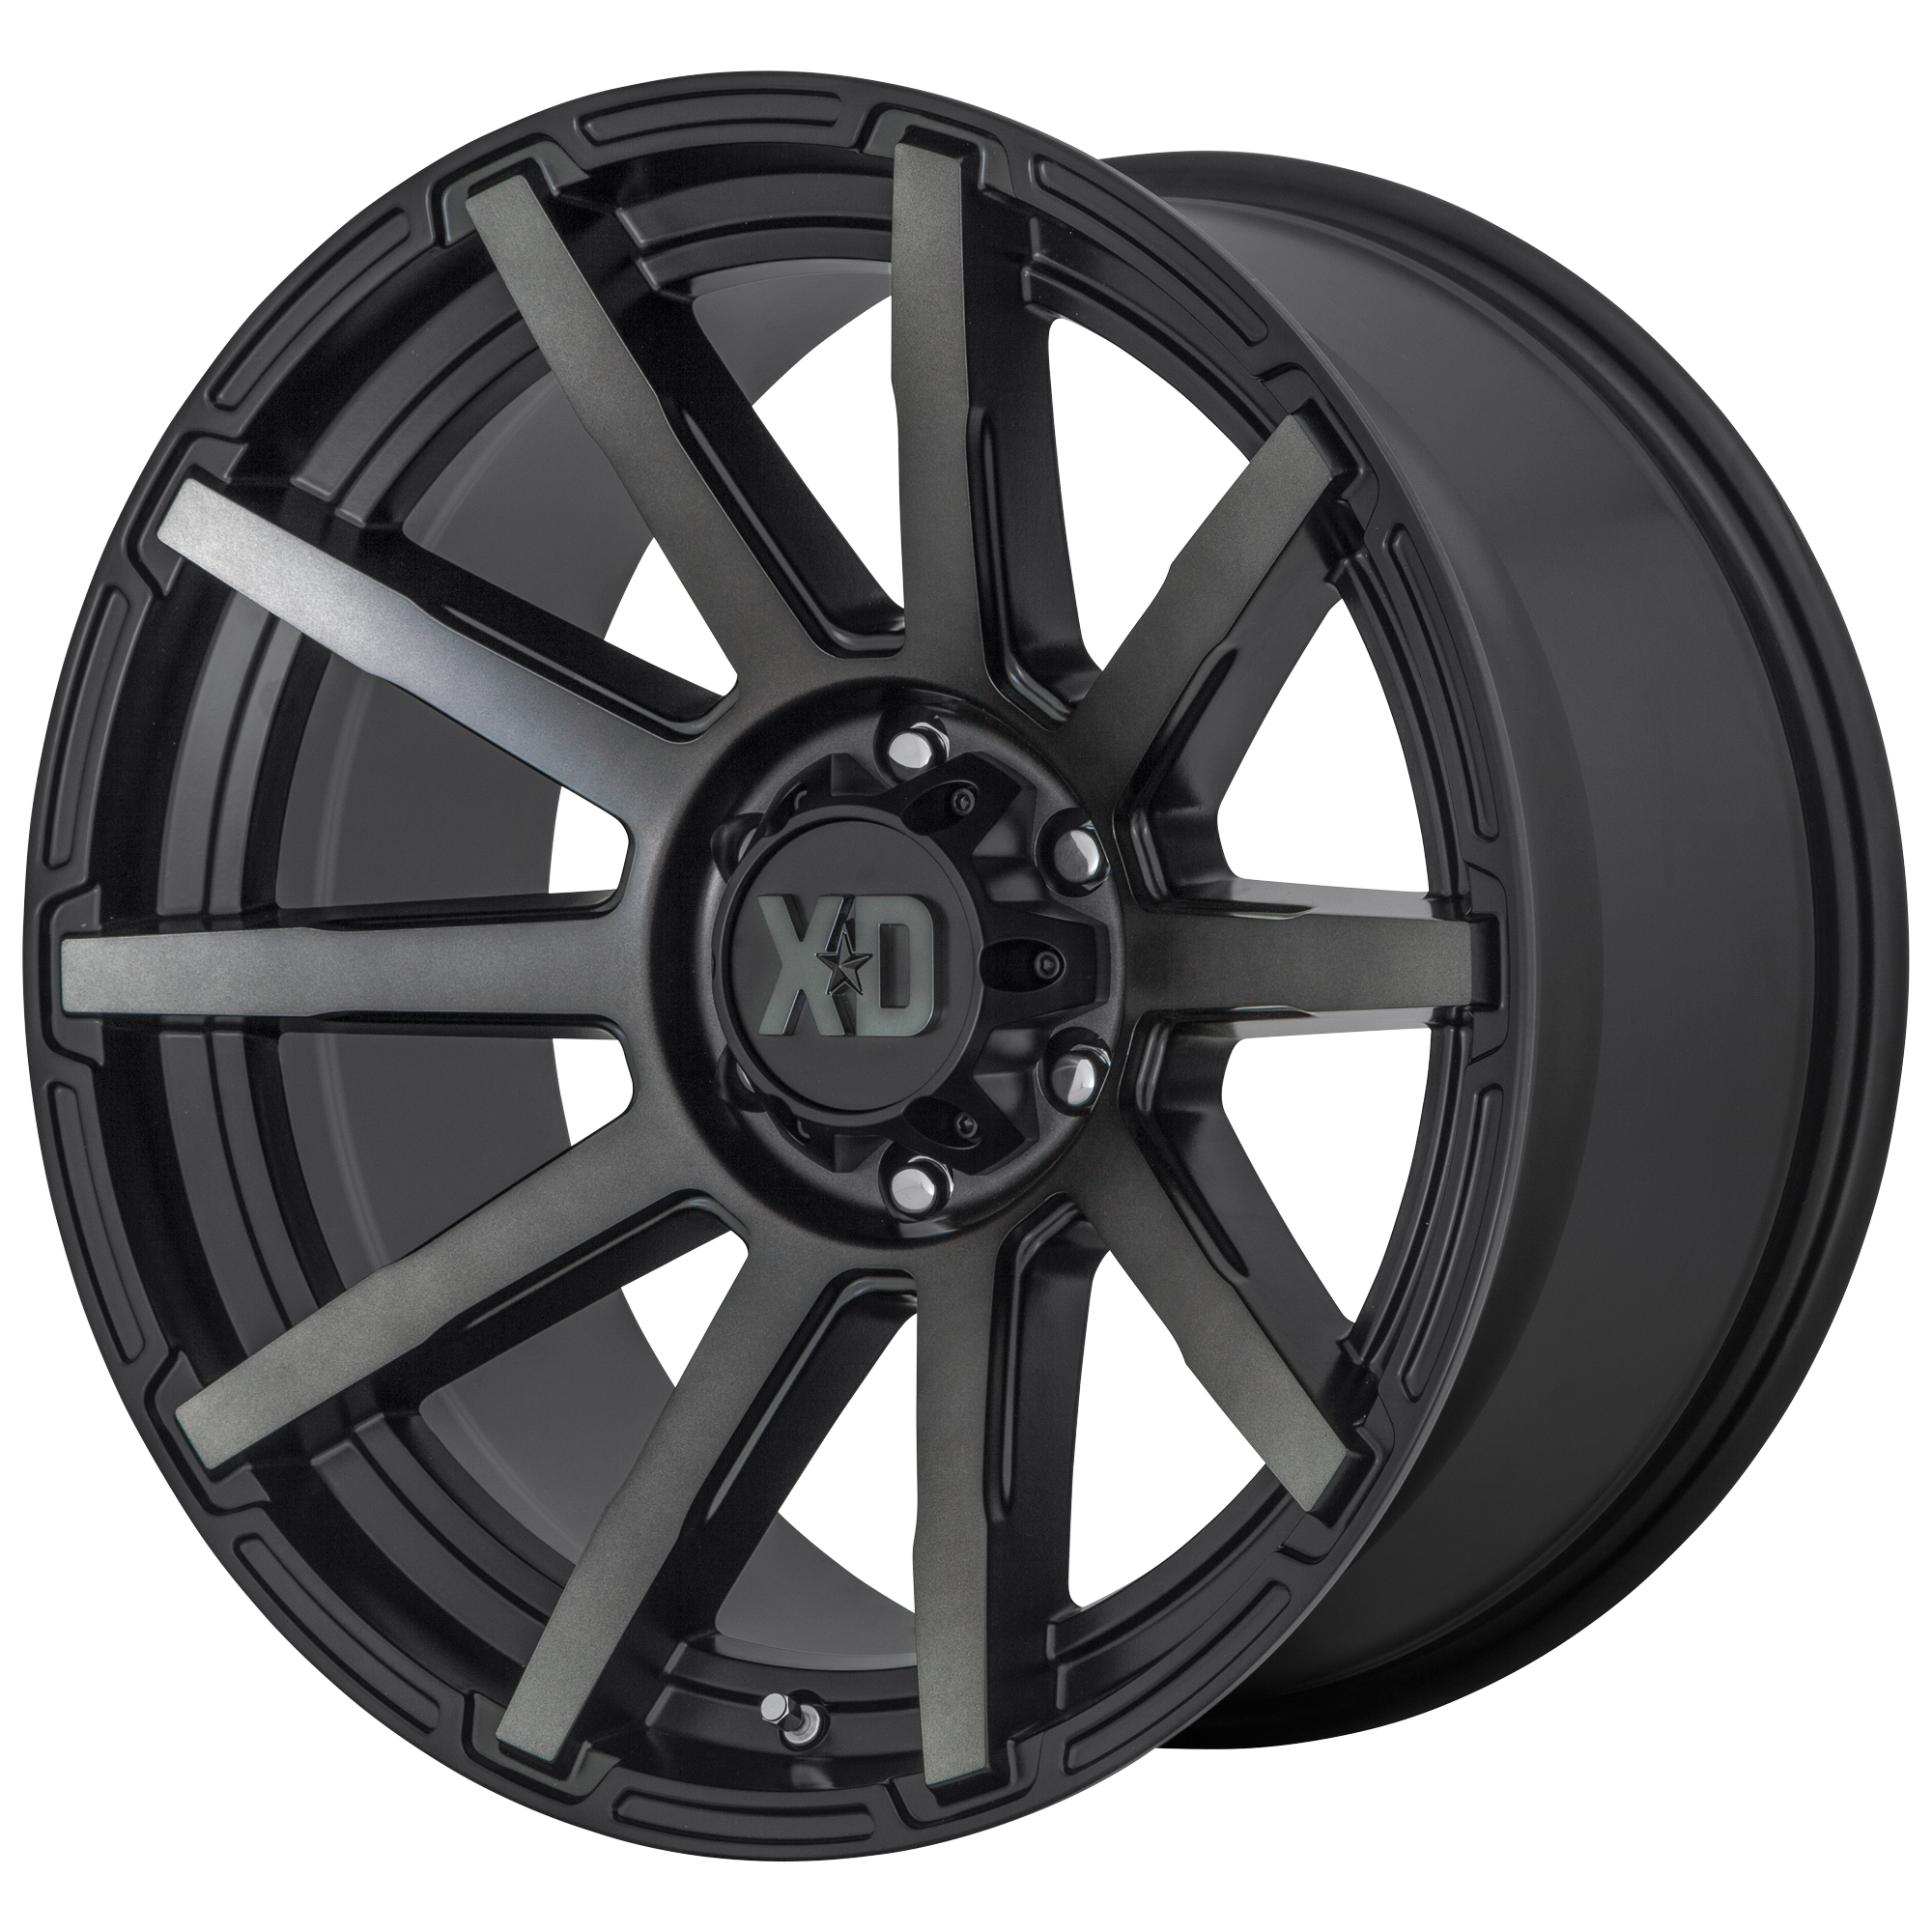 OUTBREAK 18x9 5x150.00 SATIN BLACK W/ GRAY TINT (12 mm) - Tires and Engine Performance